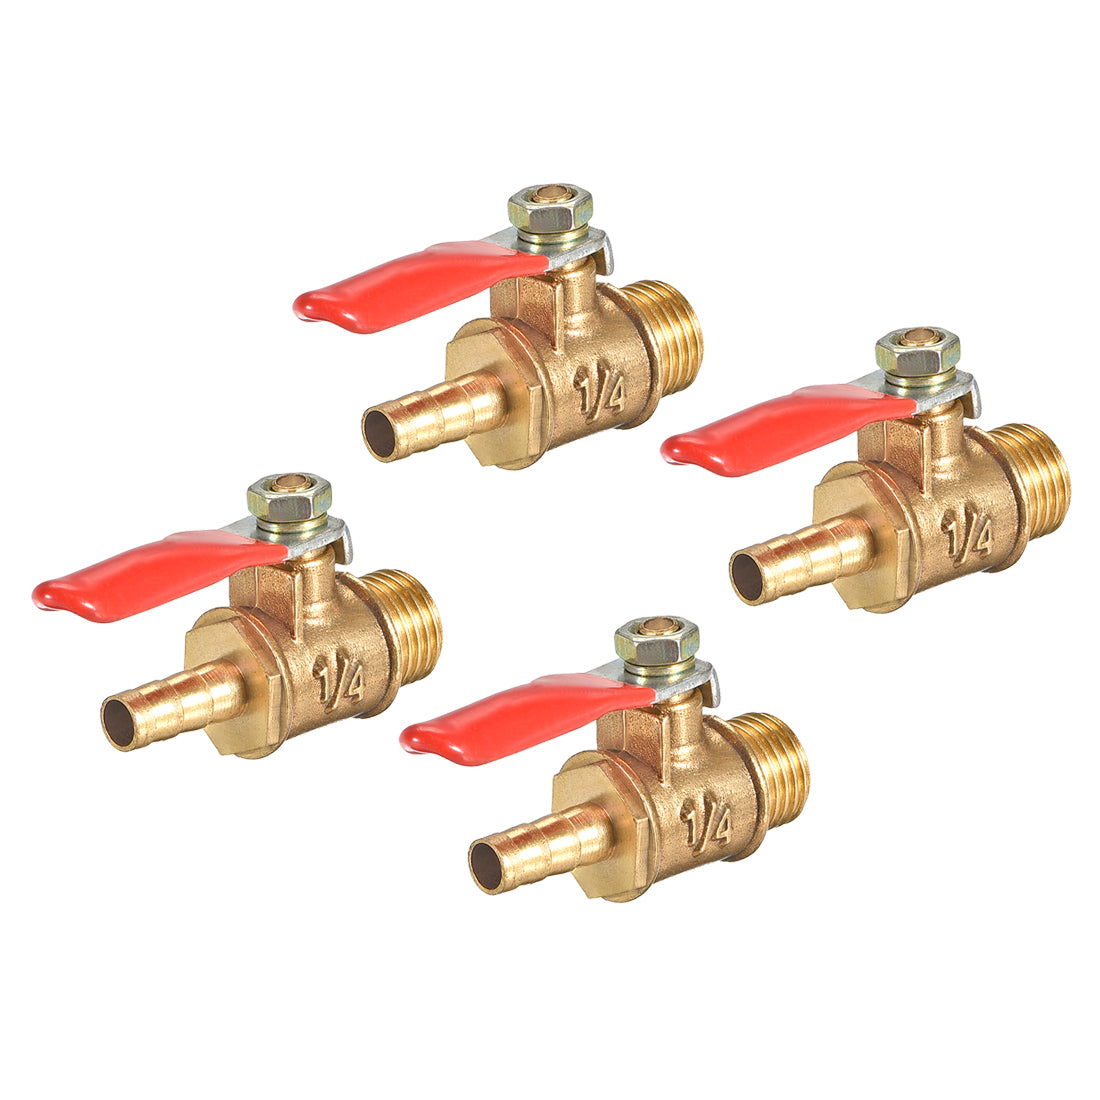 Uxcell Uxcell Brass Air Ball Valve Shut Off Switch G1/2 Male to 5/16" Hose Barb 4Pcs